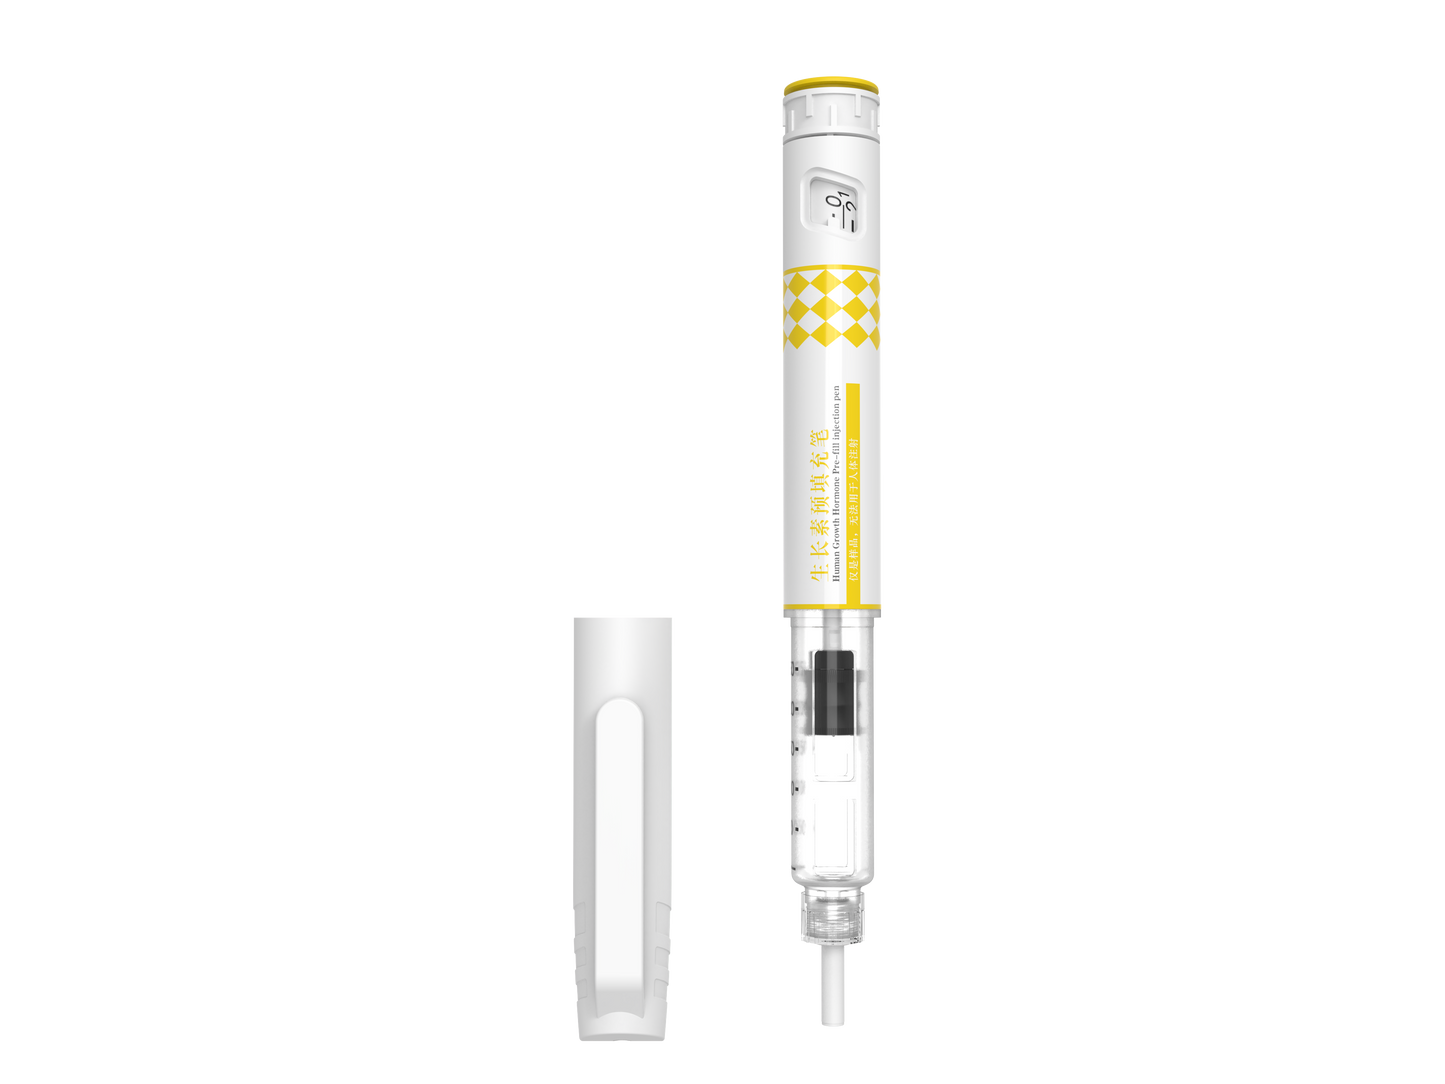 Disposable injection pen for 3ml Glass Cartridge